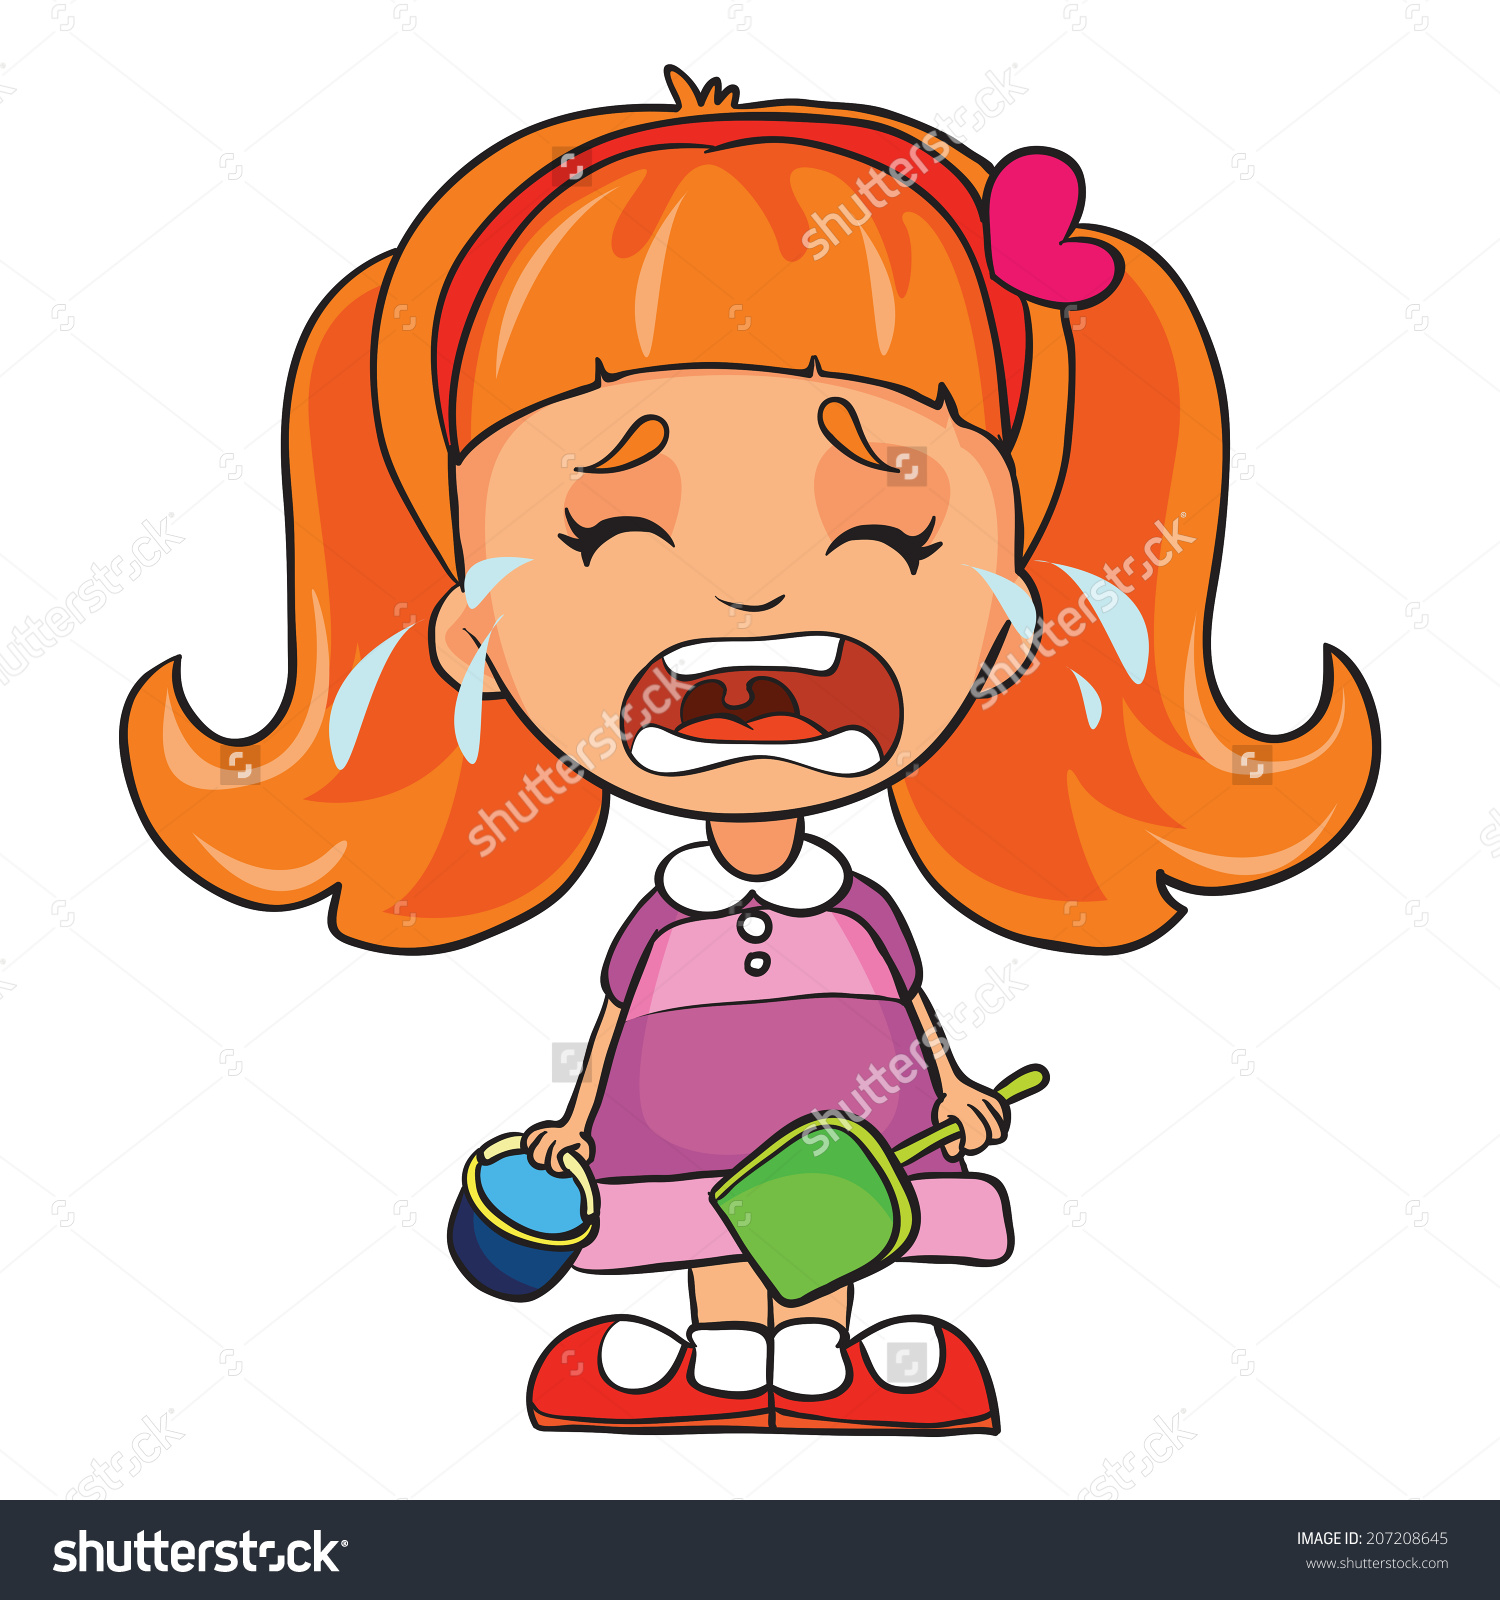 clipart of girl crying-#7